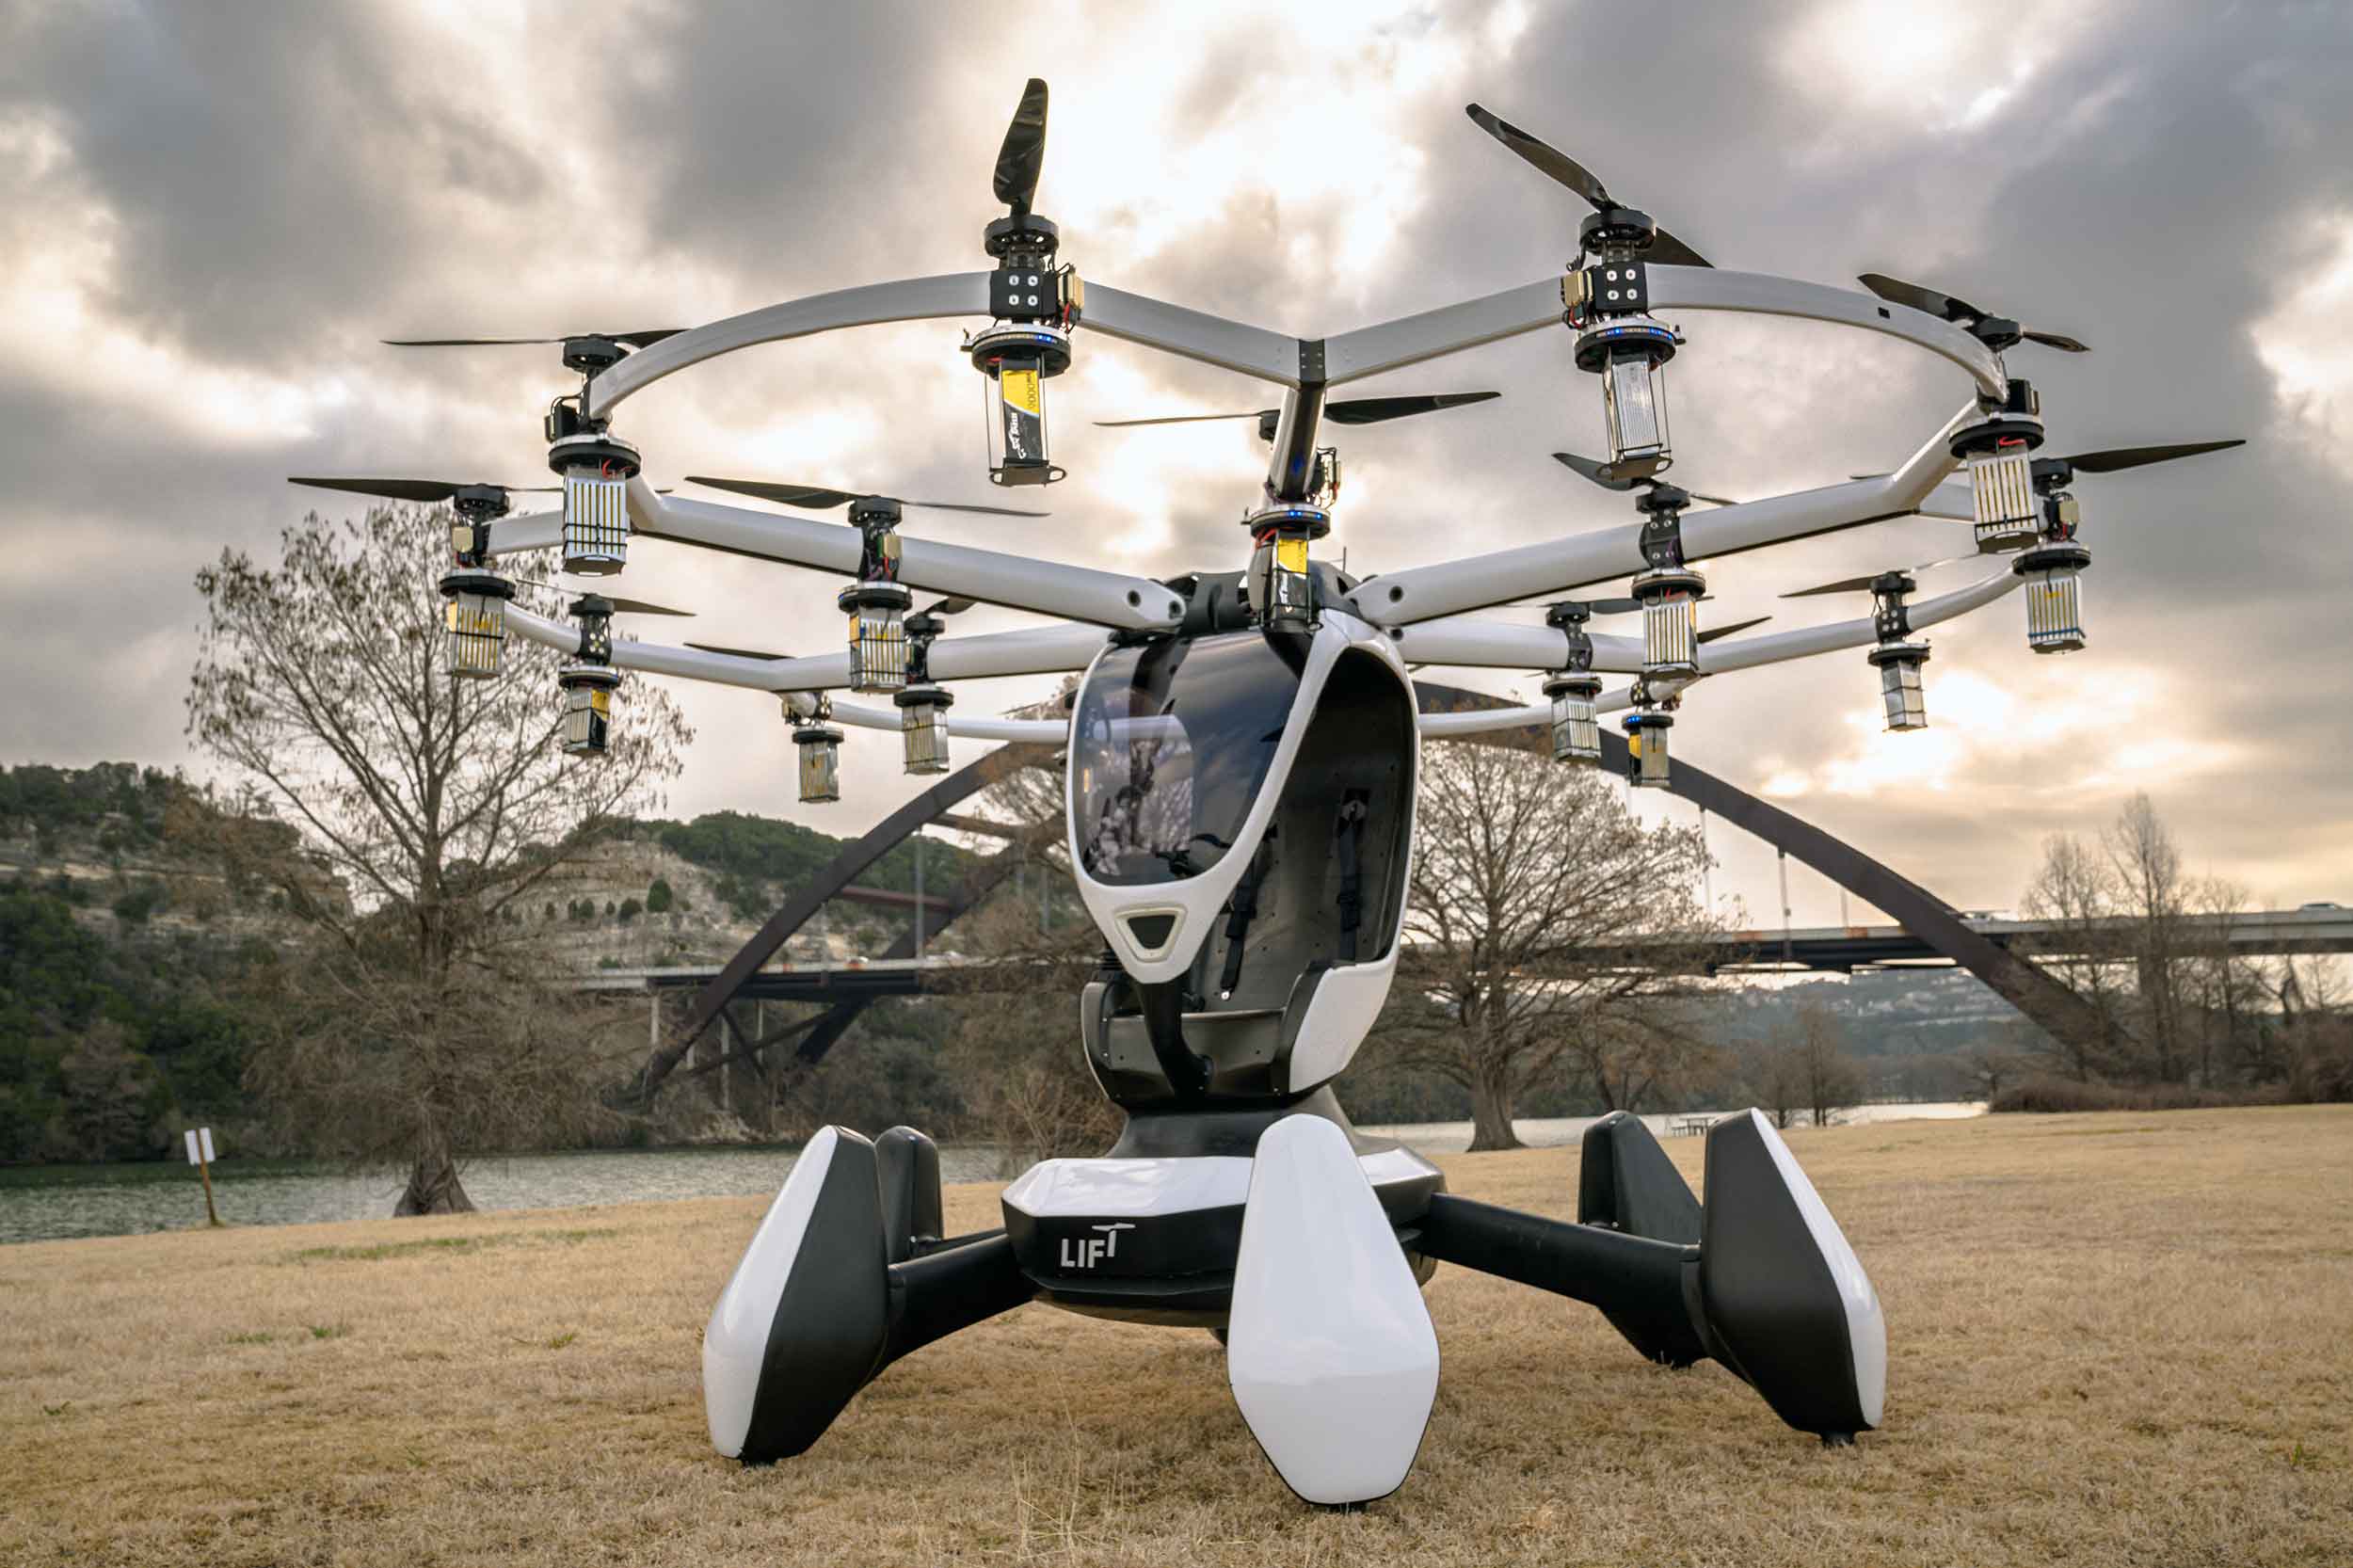 The Lift Hexa electric Vertical Take-Off and Landing single-seat aircraft. Photo: Lift